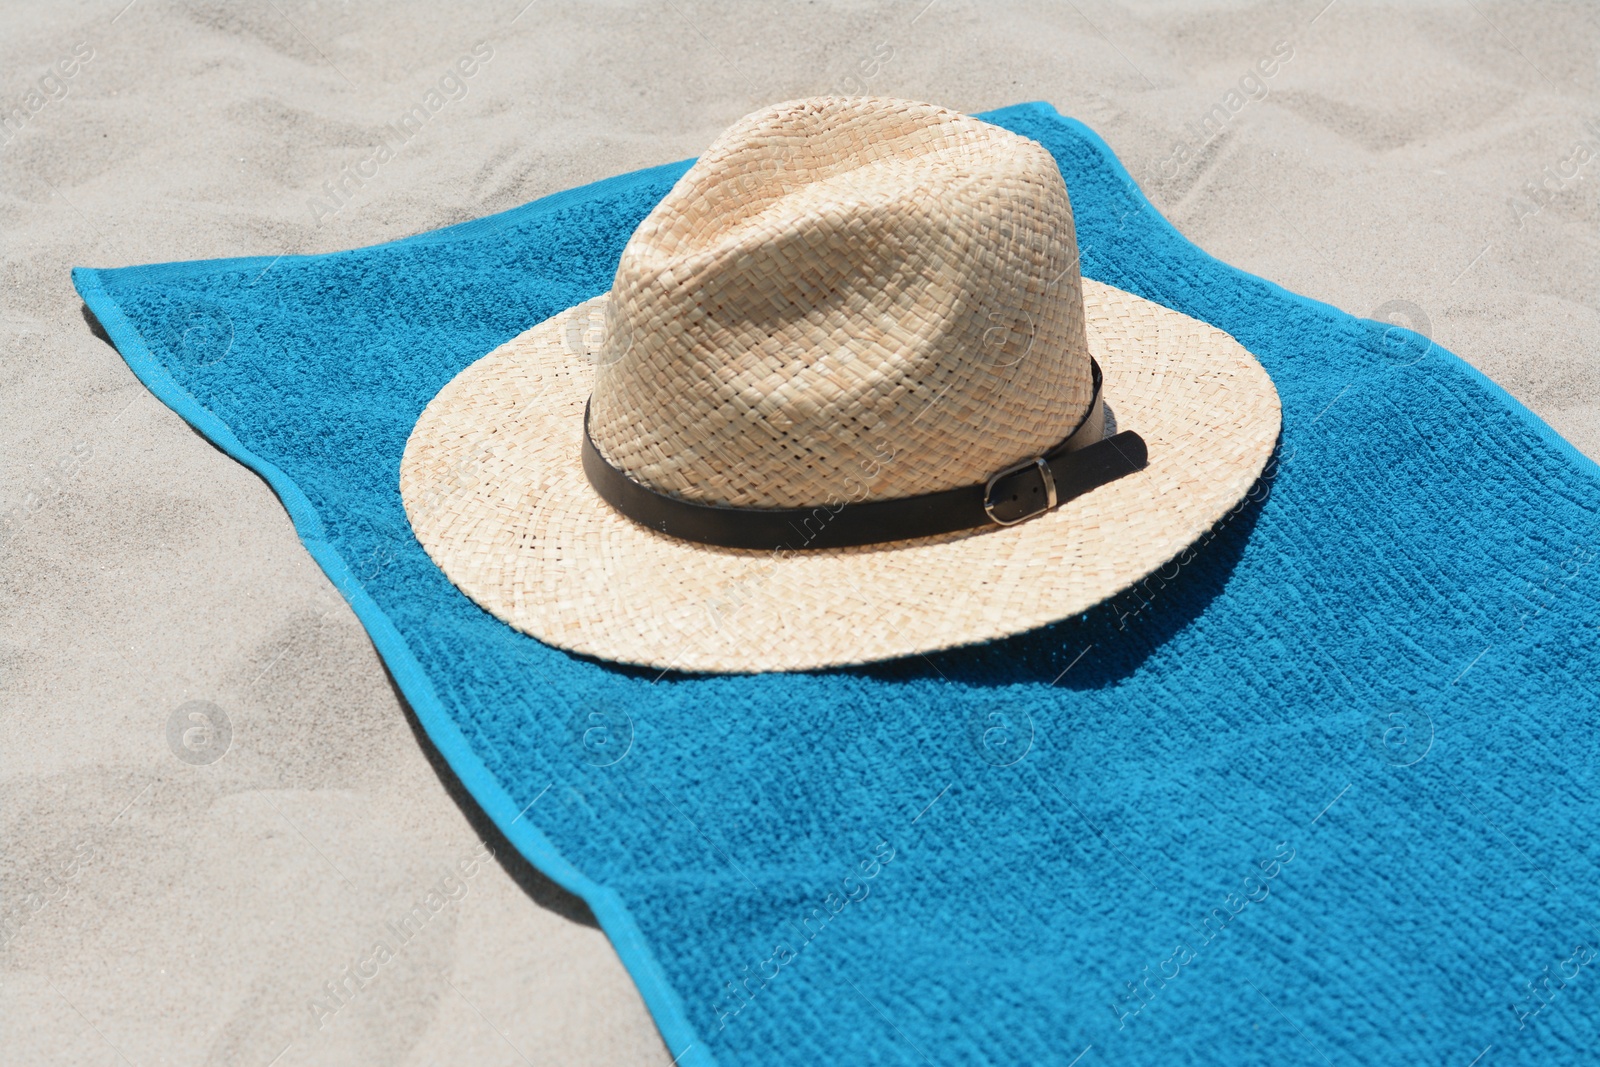 Photo of Soft blue towel and straw hat on sandy beach